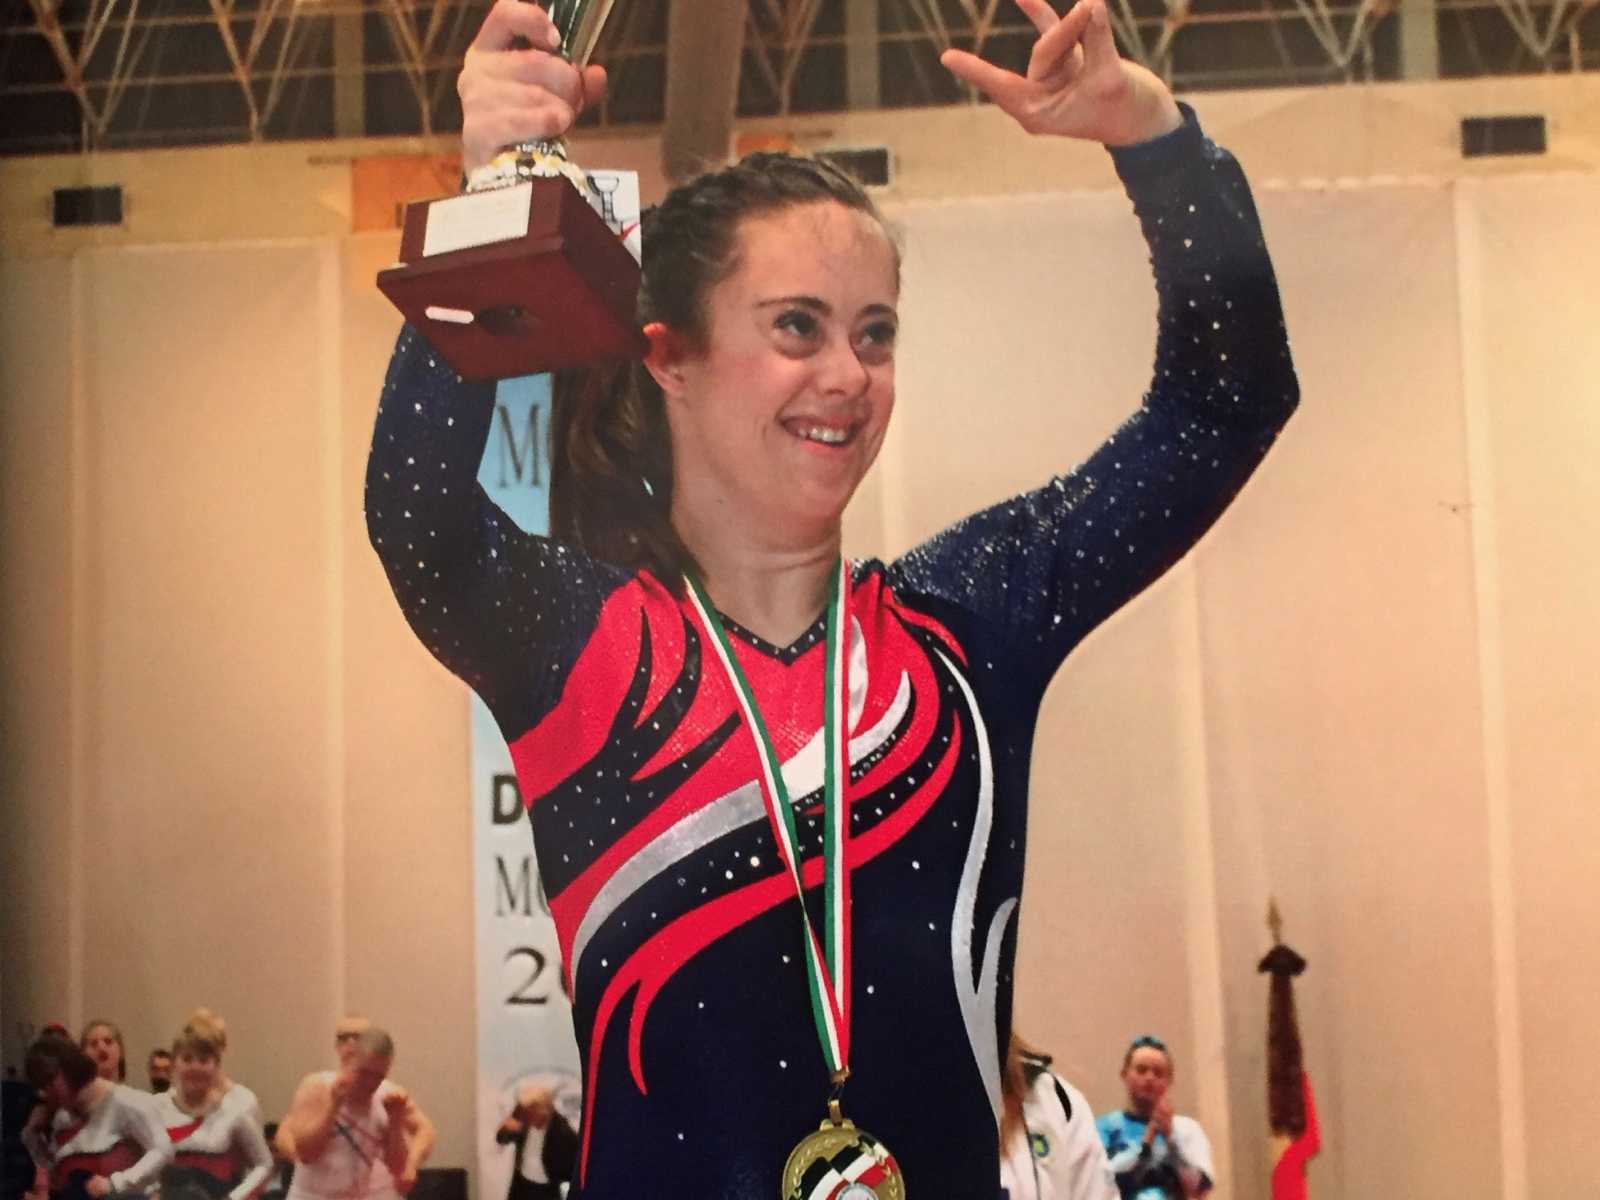 down syndrome girl in red white and blue leotard smiling holding a trophy in the air and a medal around her neck